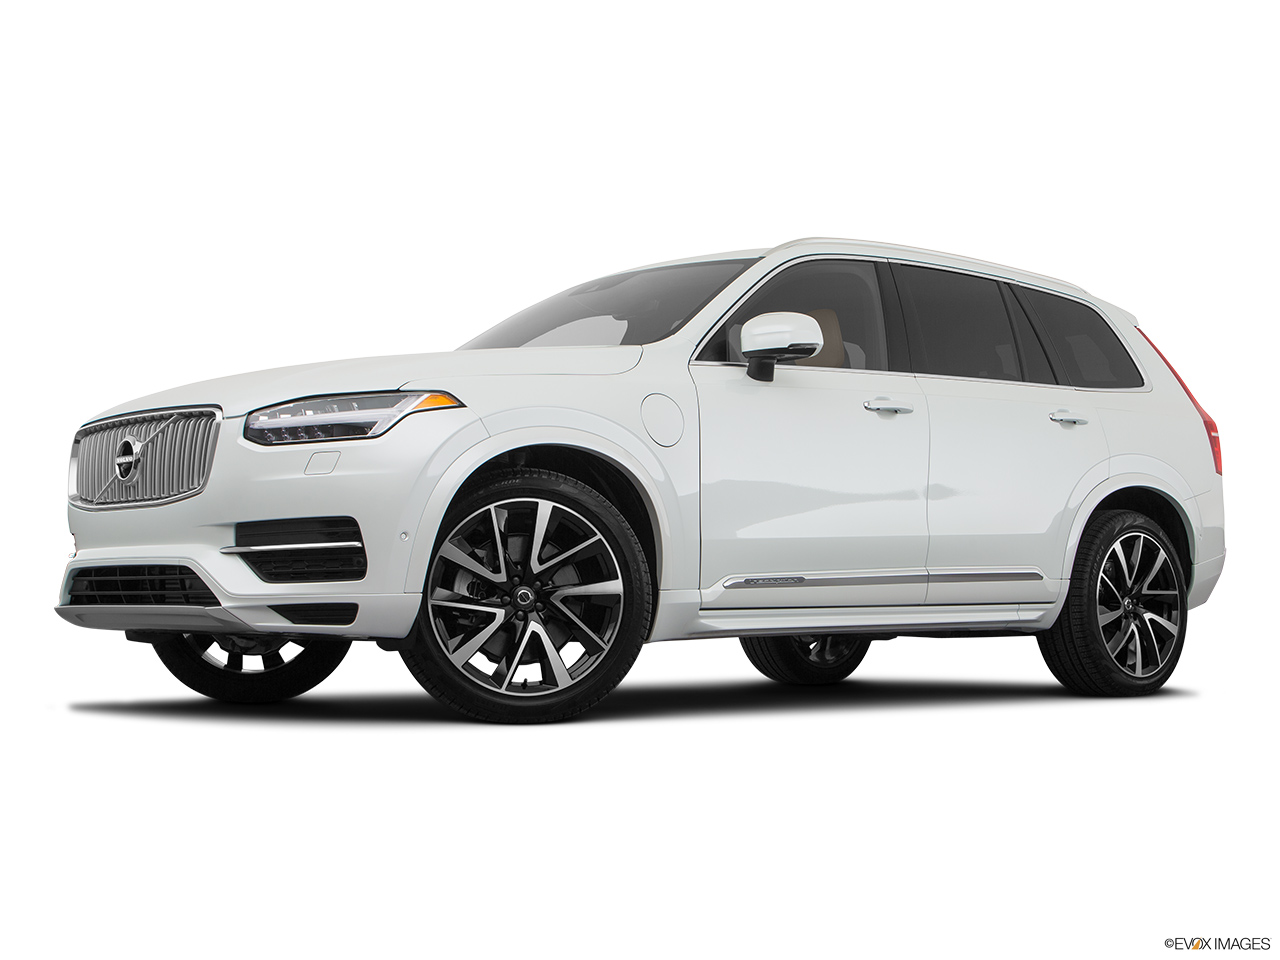 2018 Volvo XC90 T8 Inscription eAWD Plug-in Hybrid Low/wide front 5/8. 